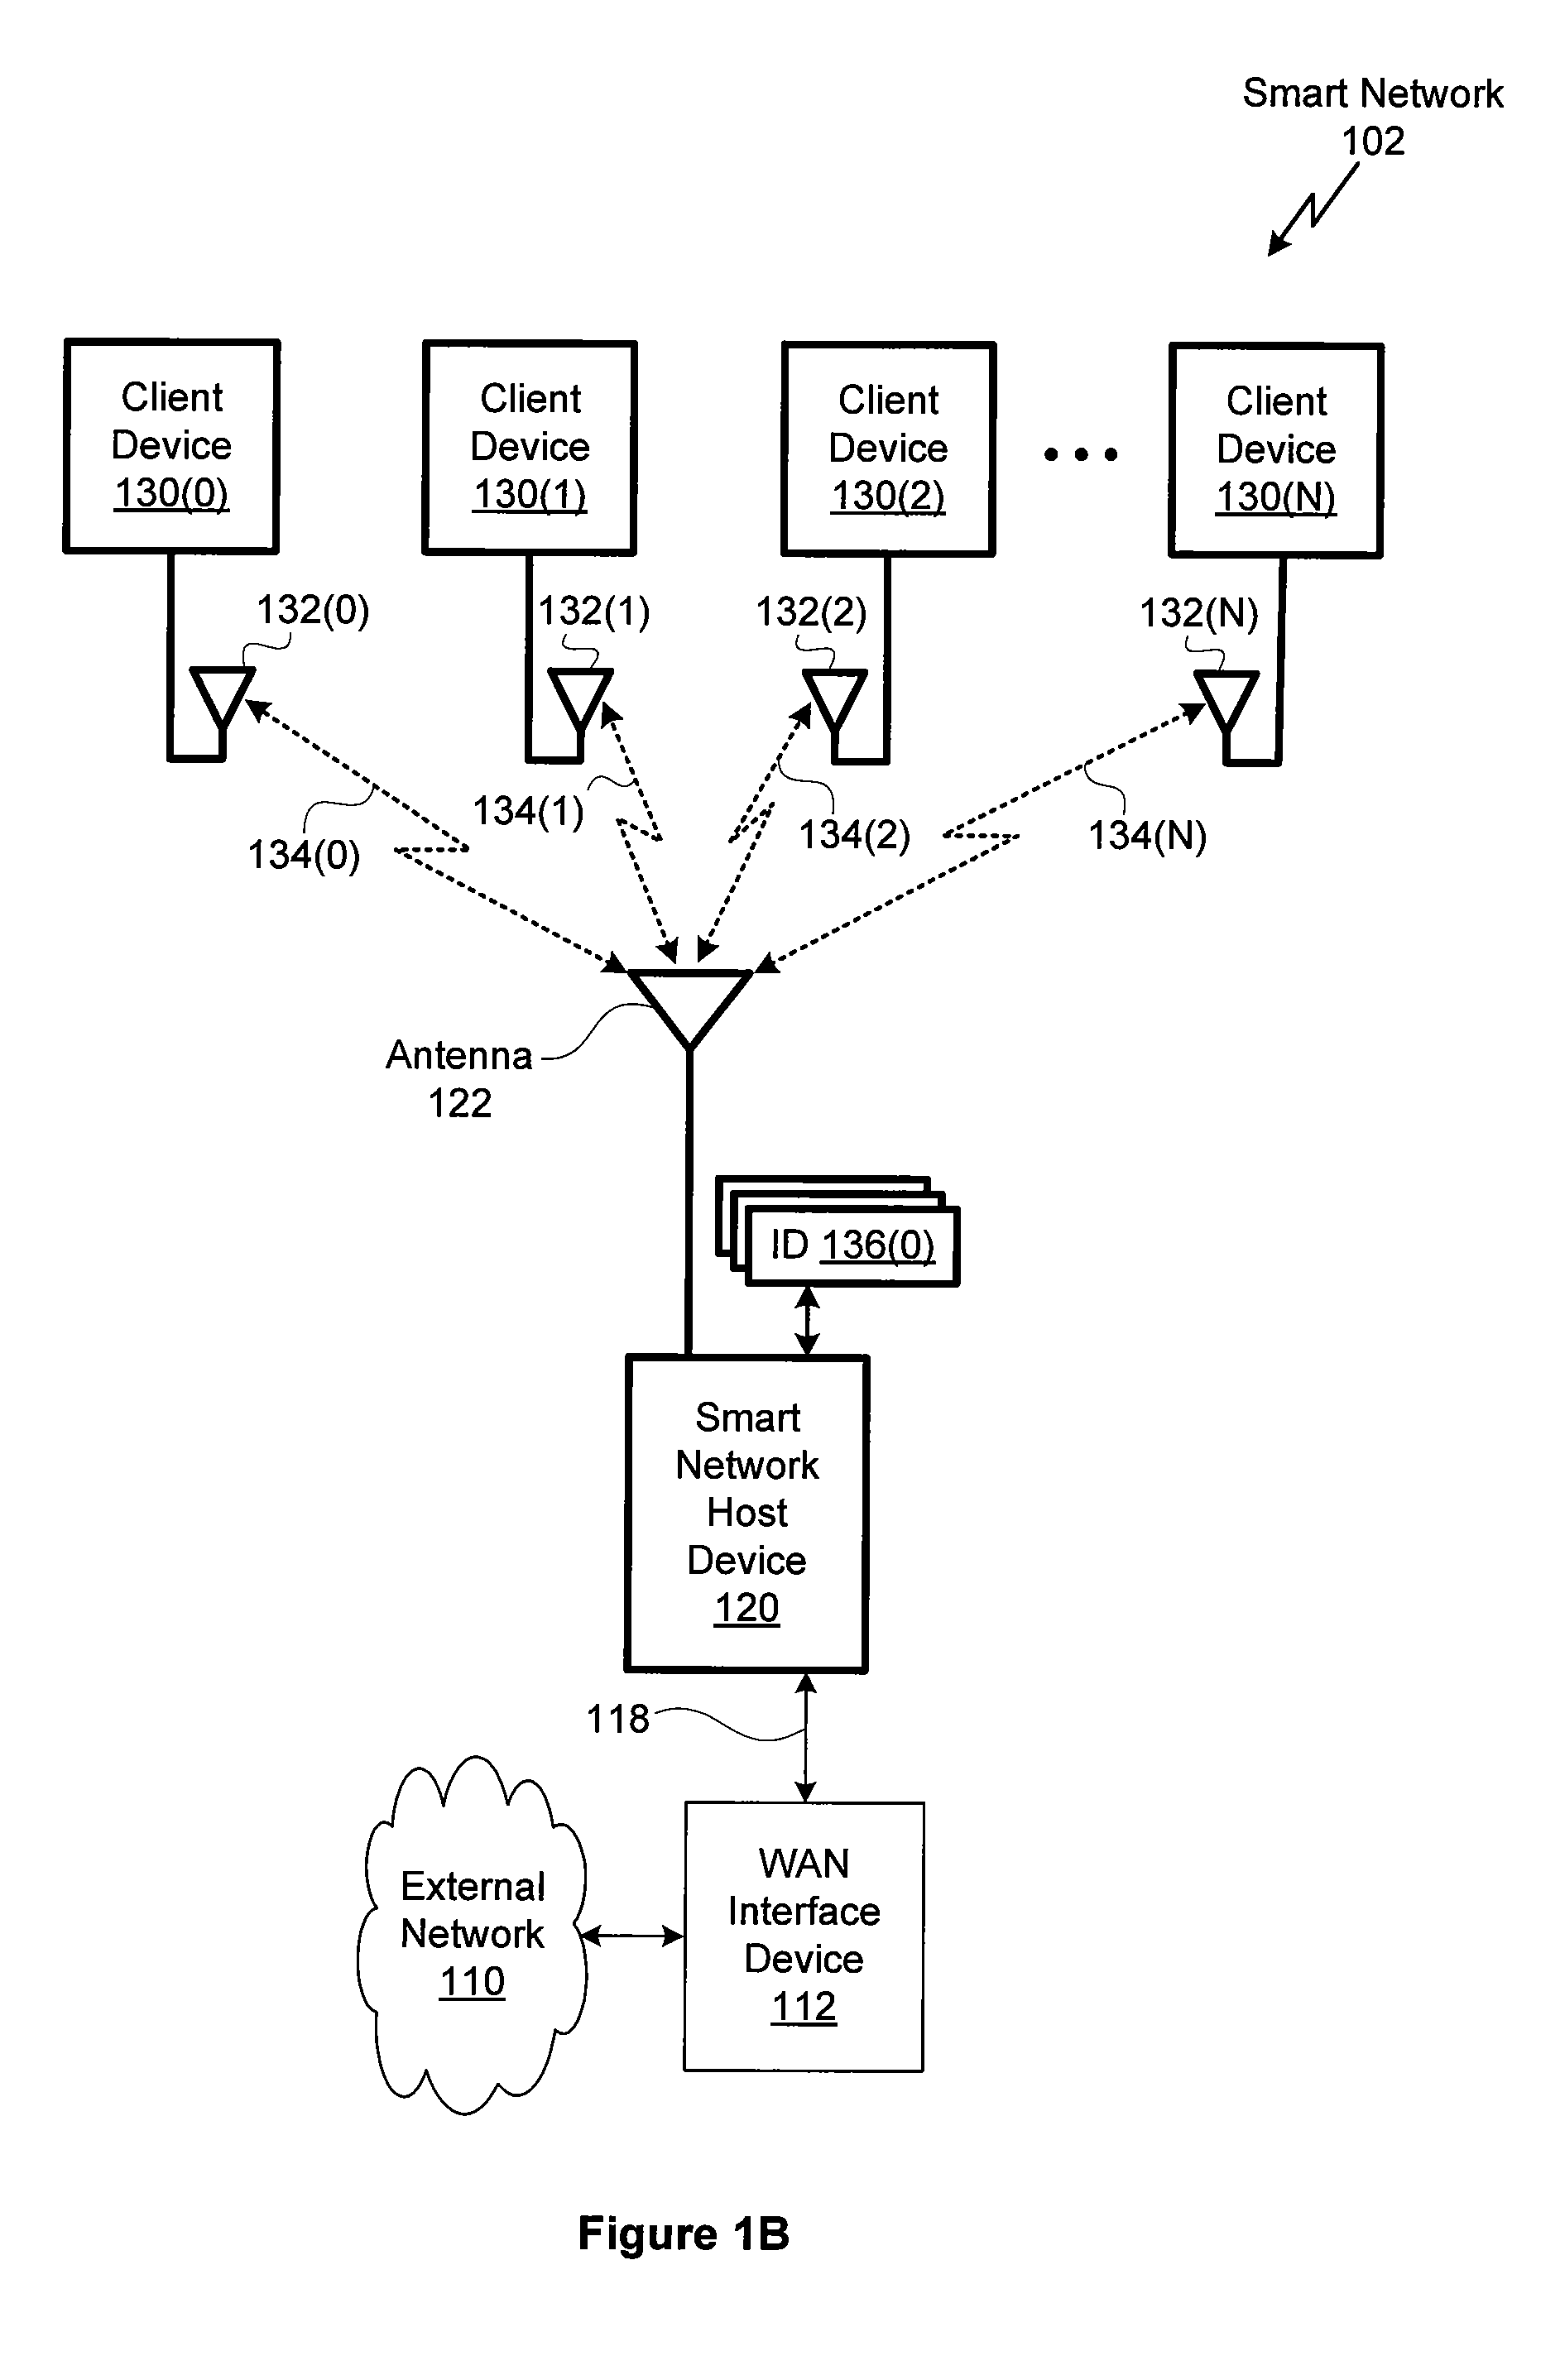 Method of adding a client device or service to a wireless network